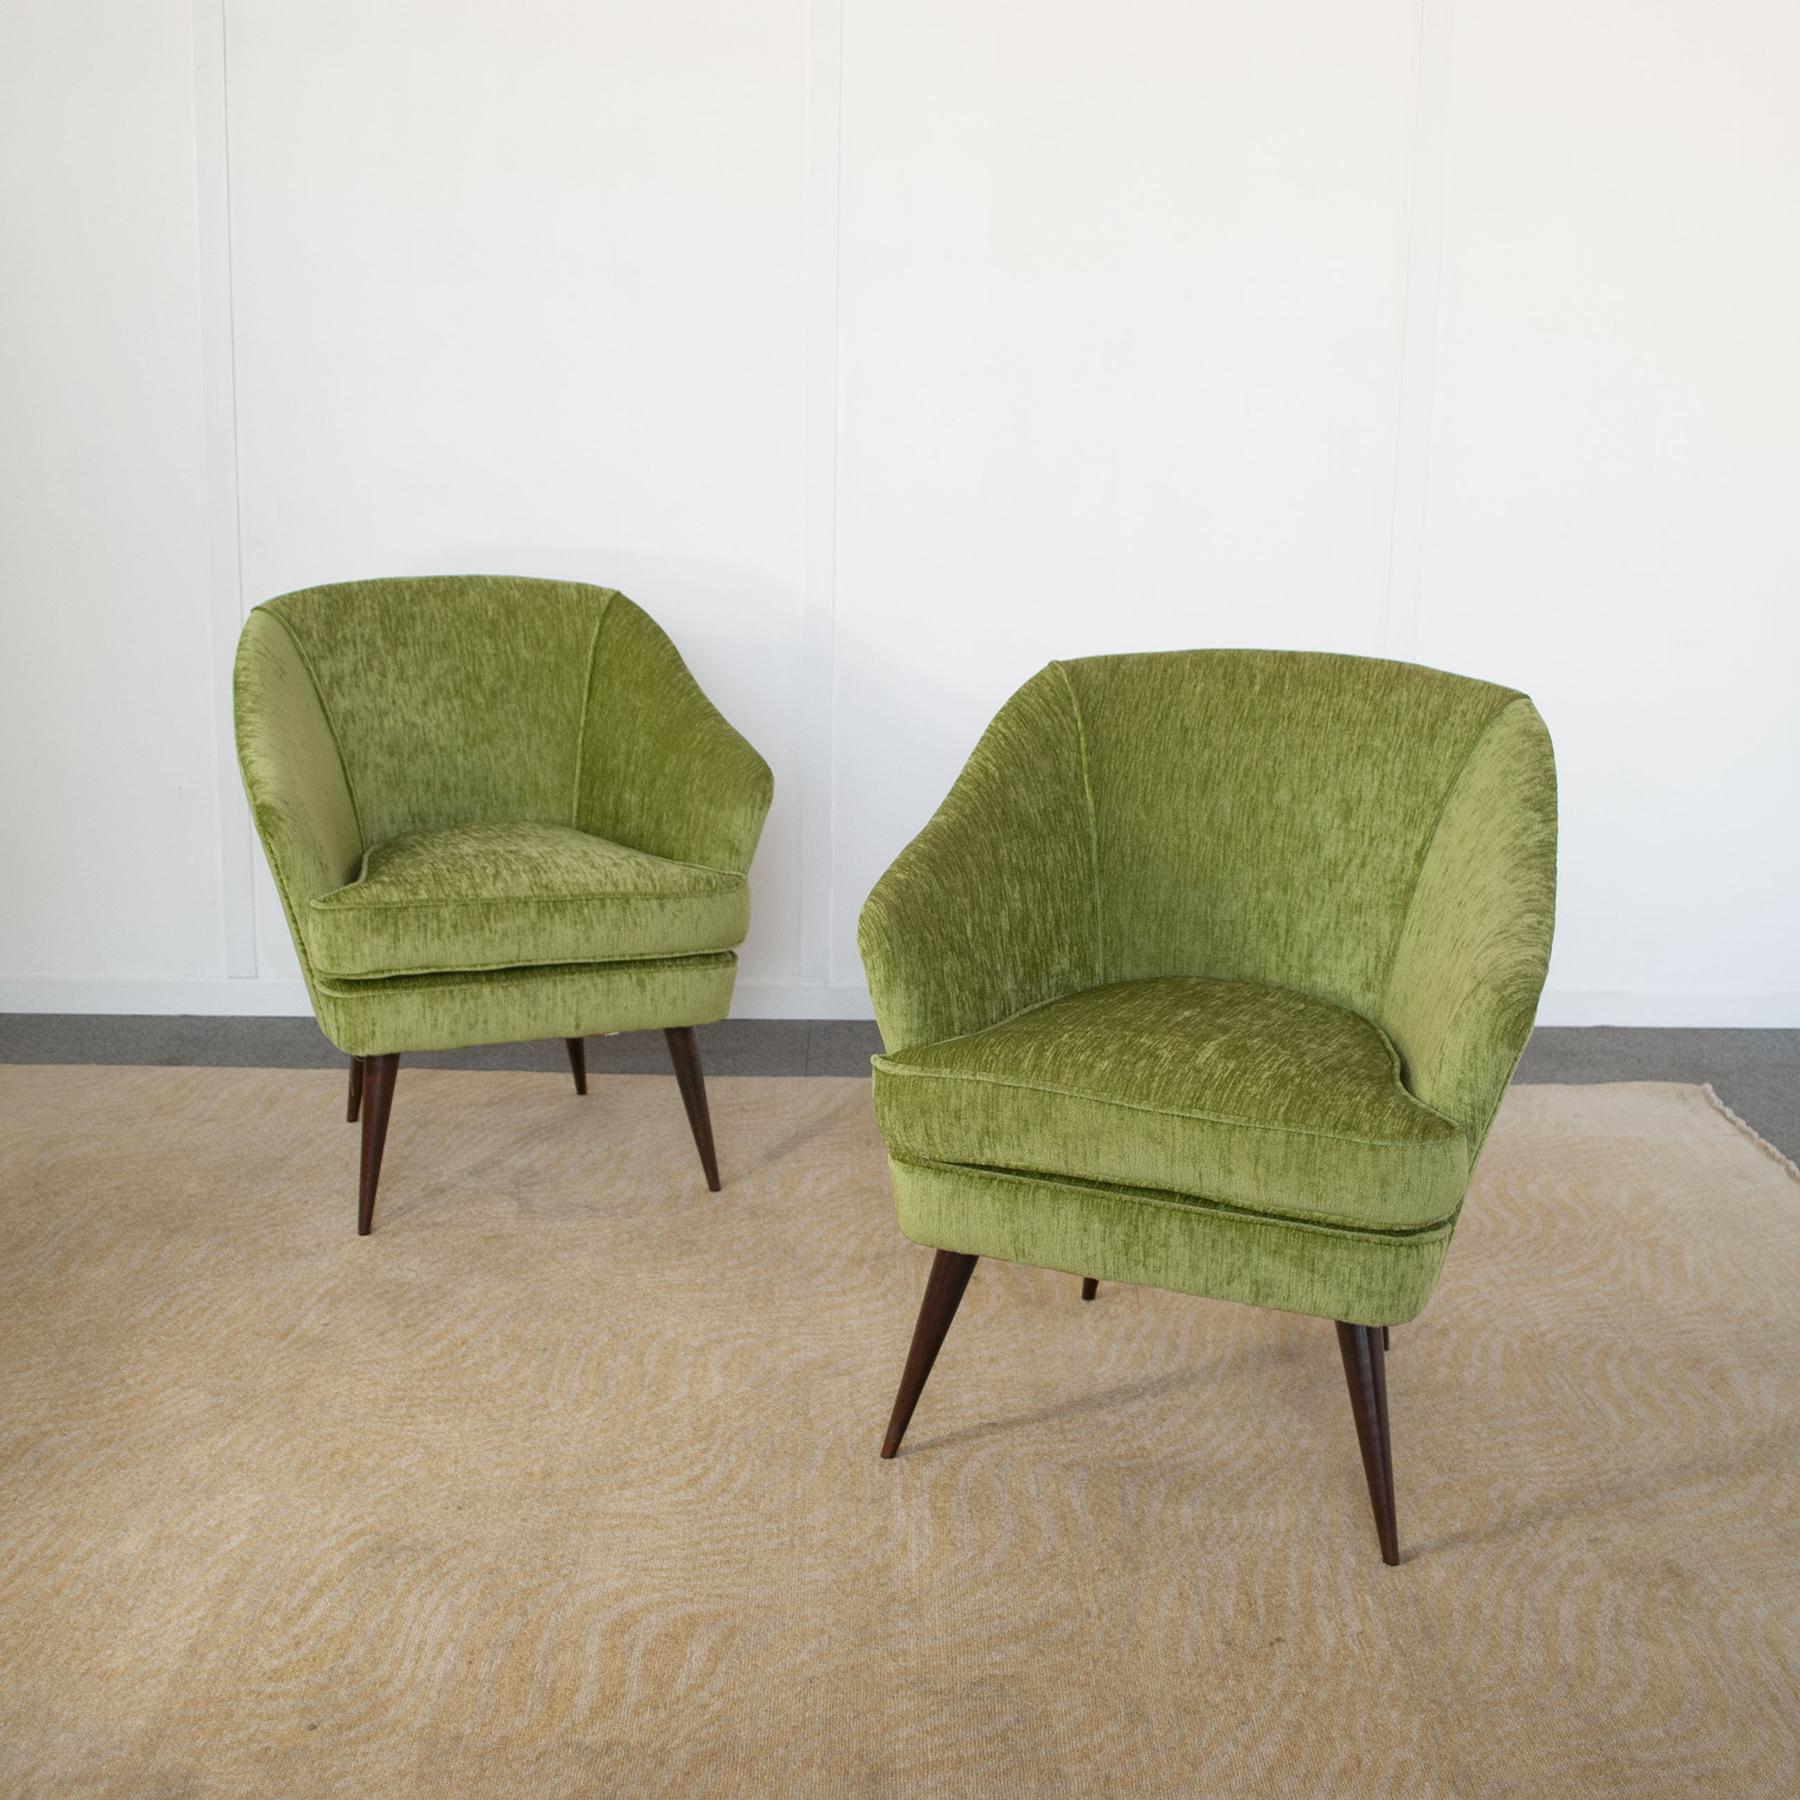 Set of two armchairs manufactured by Casa e Giardino designer Gio Ponti 1940 .

Gio Ponti designed many objects in a wide variety of fields, from theatre sets, lamps, chairs, kitchen objects and the interiors of ocean liners. Initially in the art of